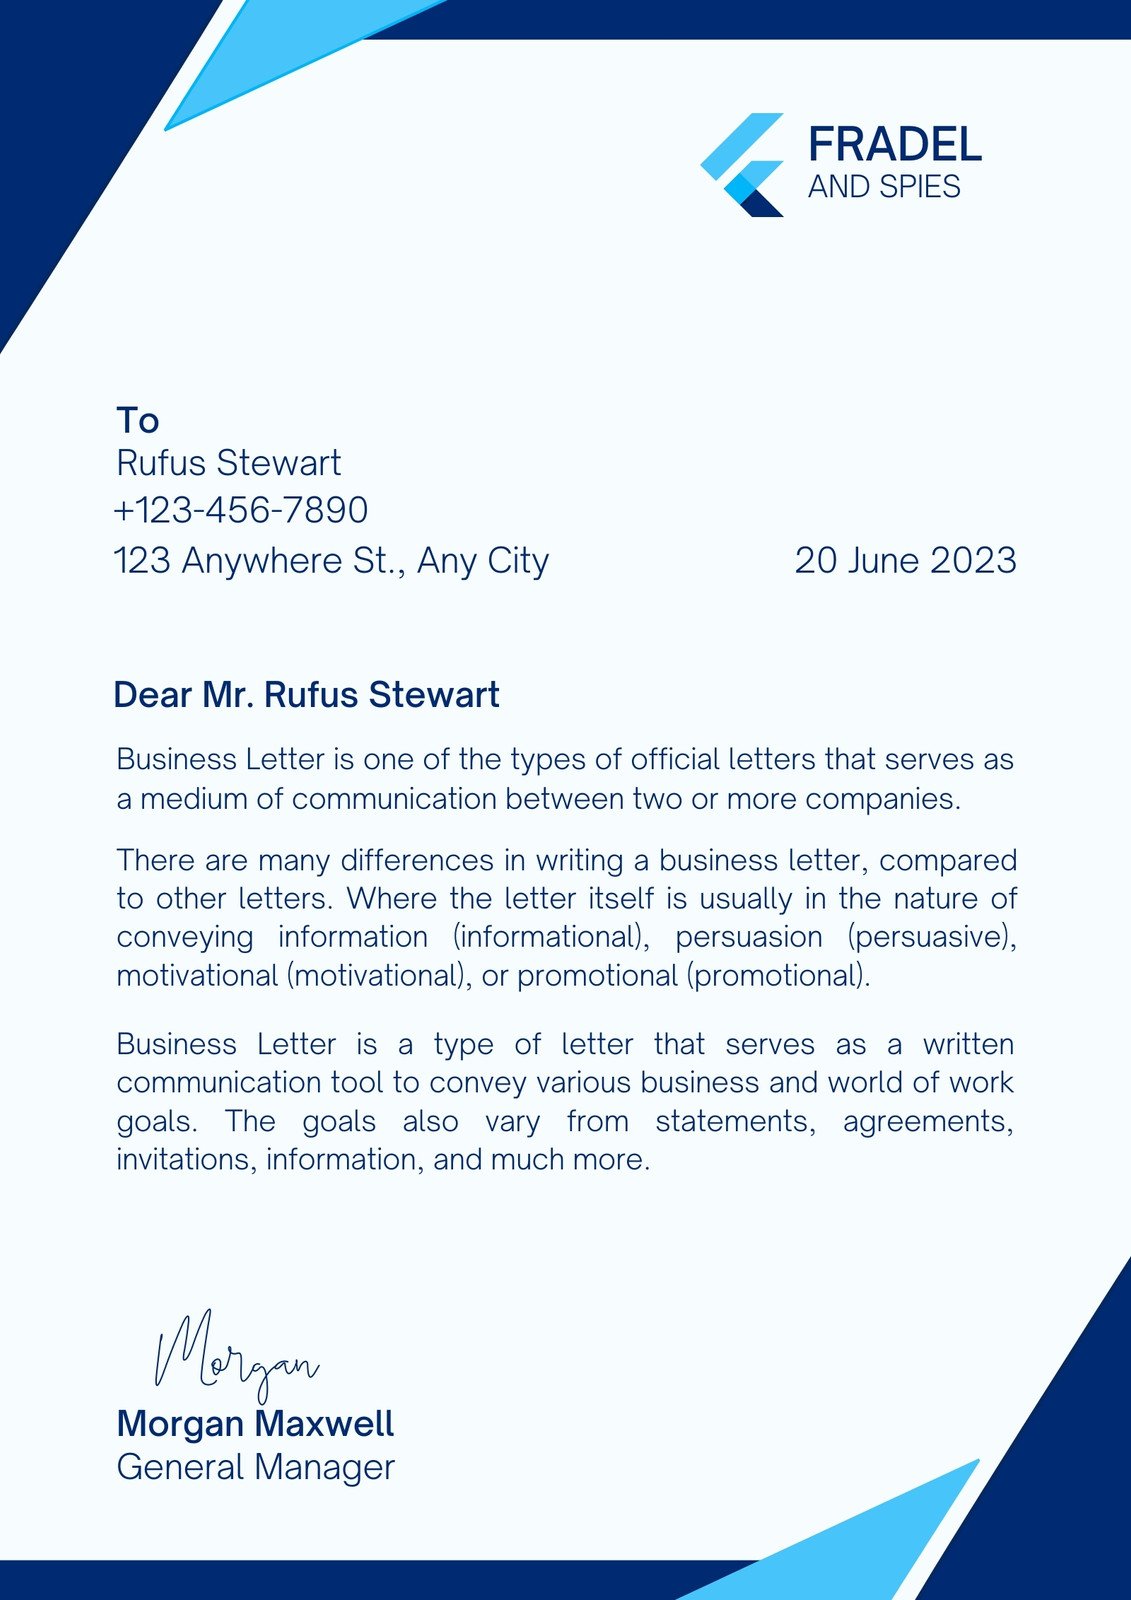 office-letterhead-design-psd-free-download-printable-templates